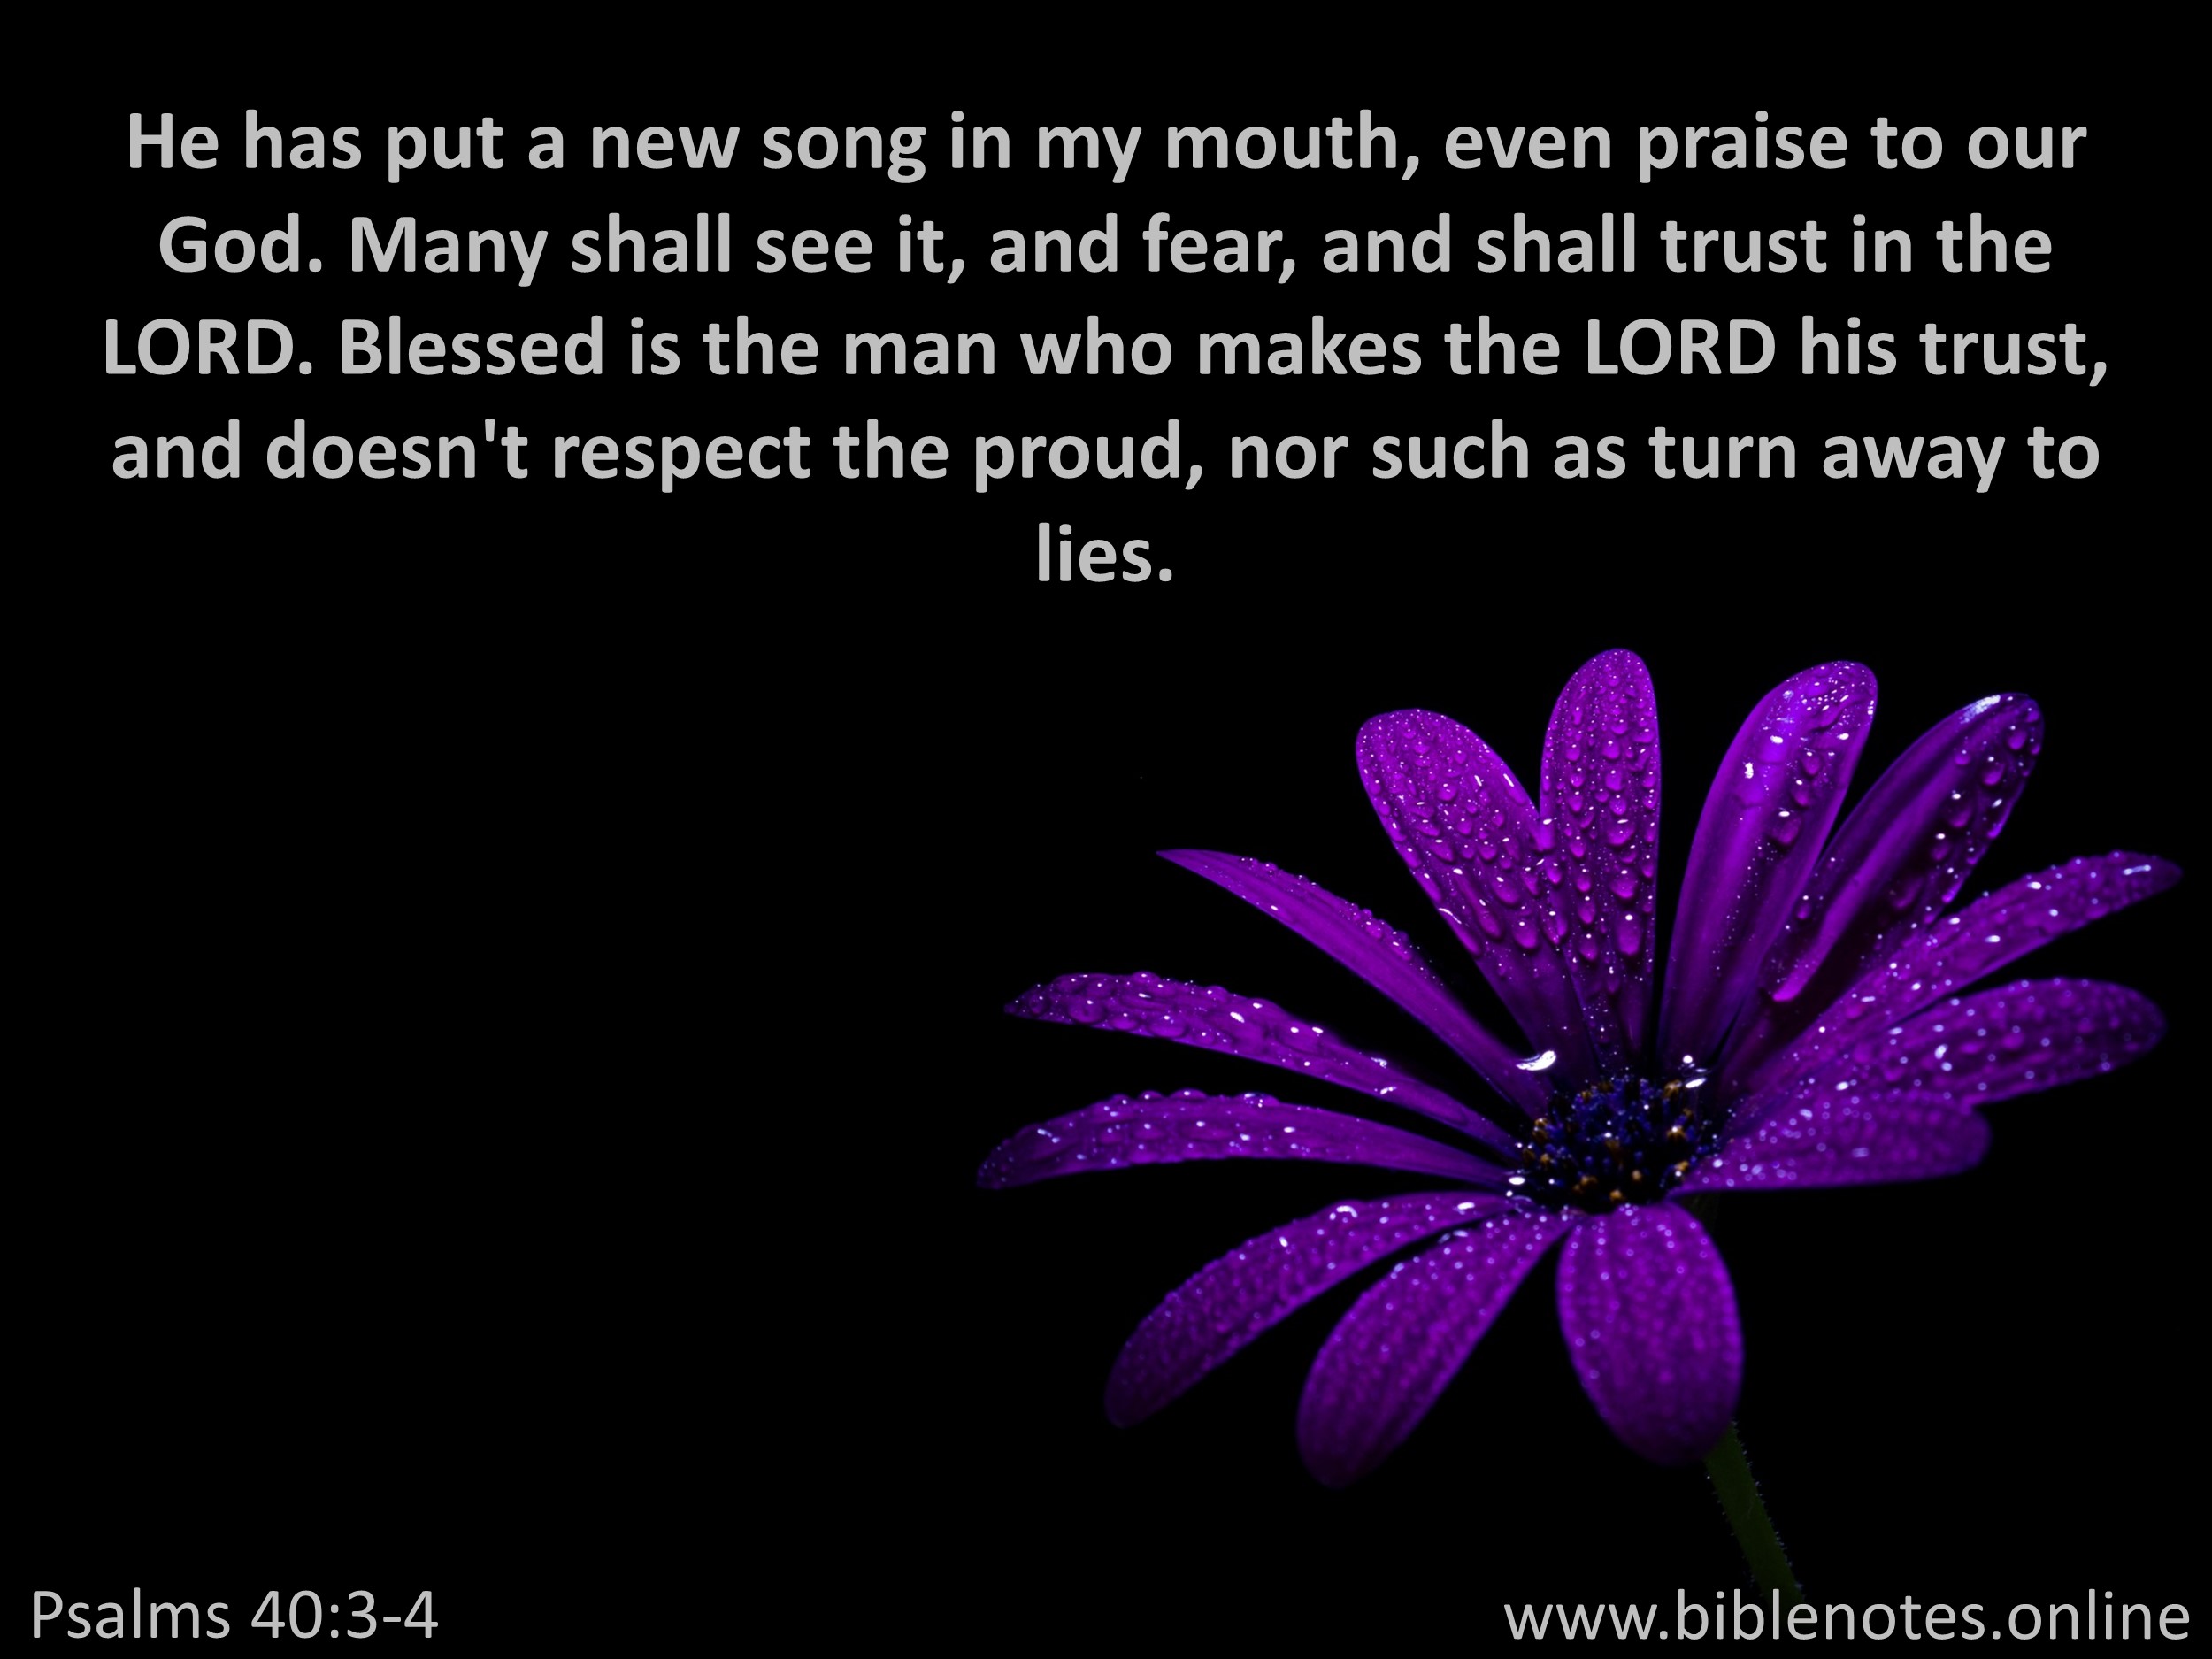 Bible Verse from Psalms Chapter 40